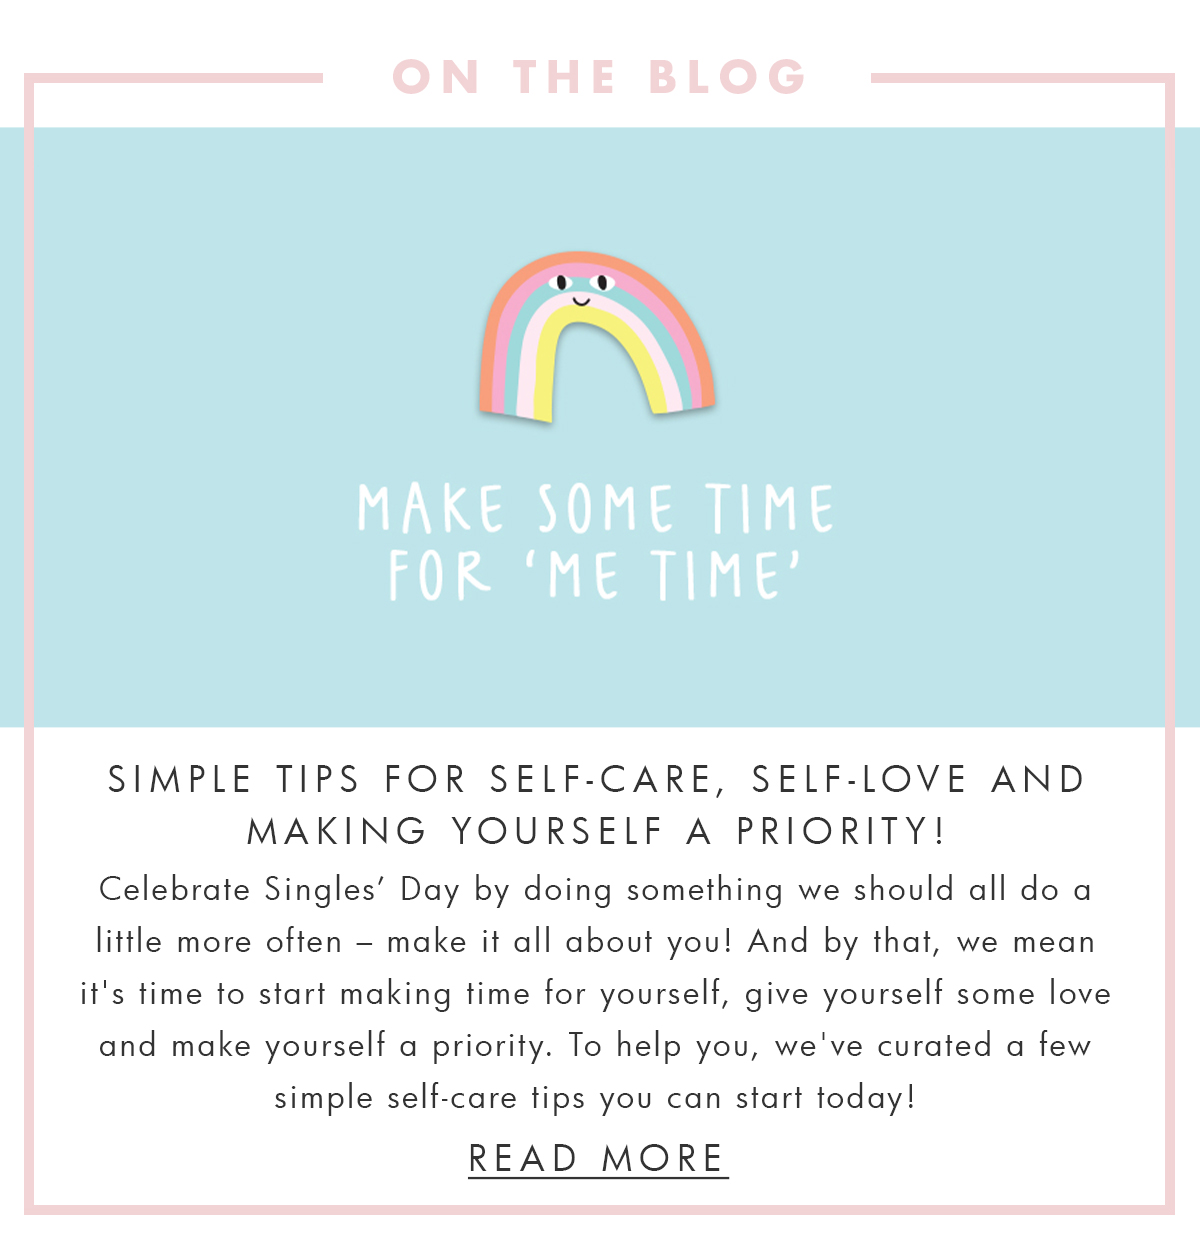 On the blog. Simple tips for self-care, self-love and making yourself a priority. Read more. 